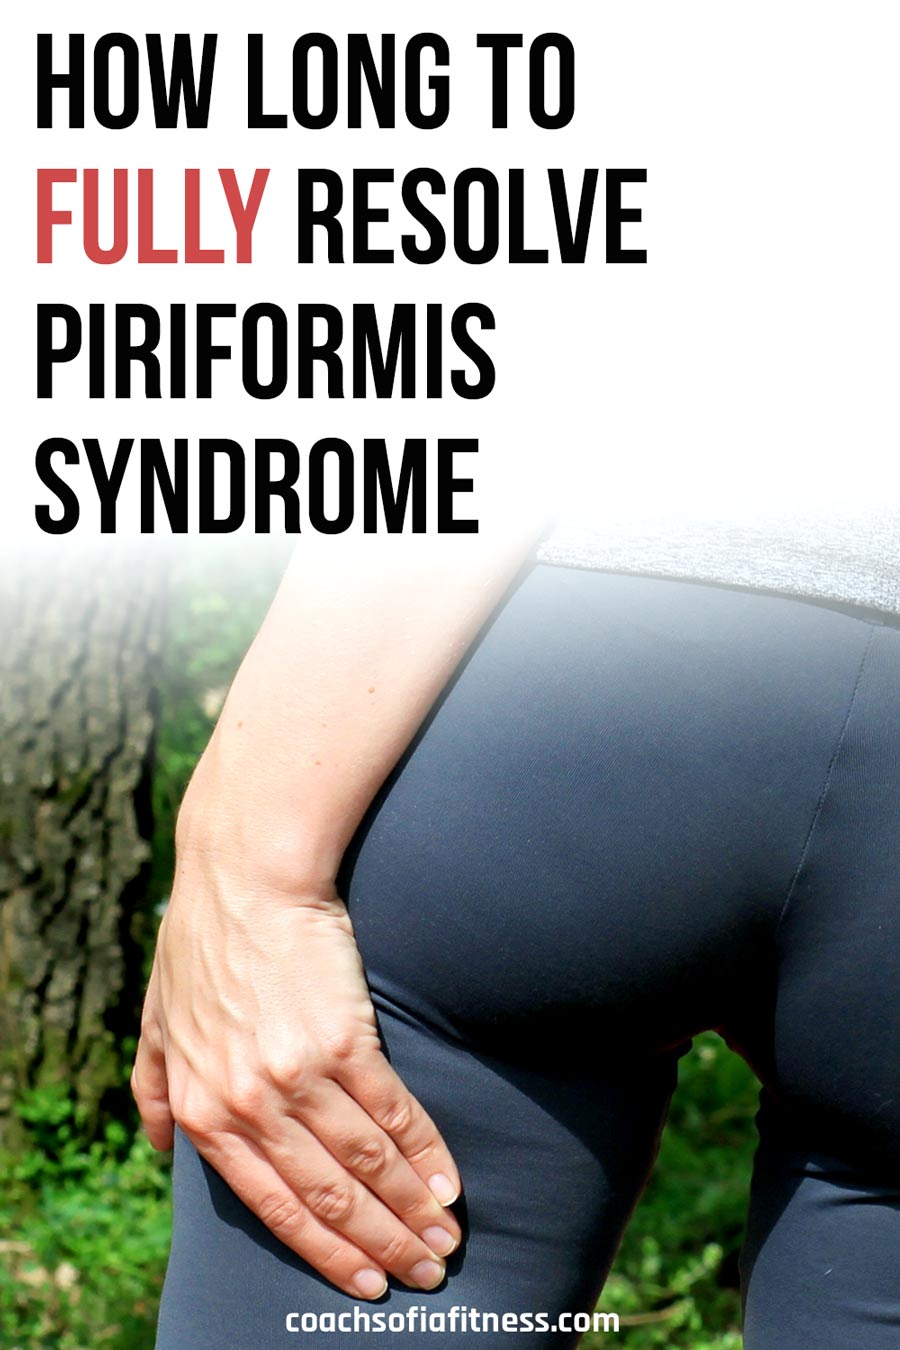 Here's How Long It Takes To Get Rid of Piriformis Syndrome - Coach